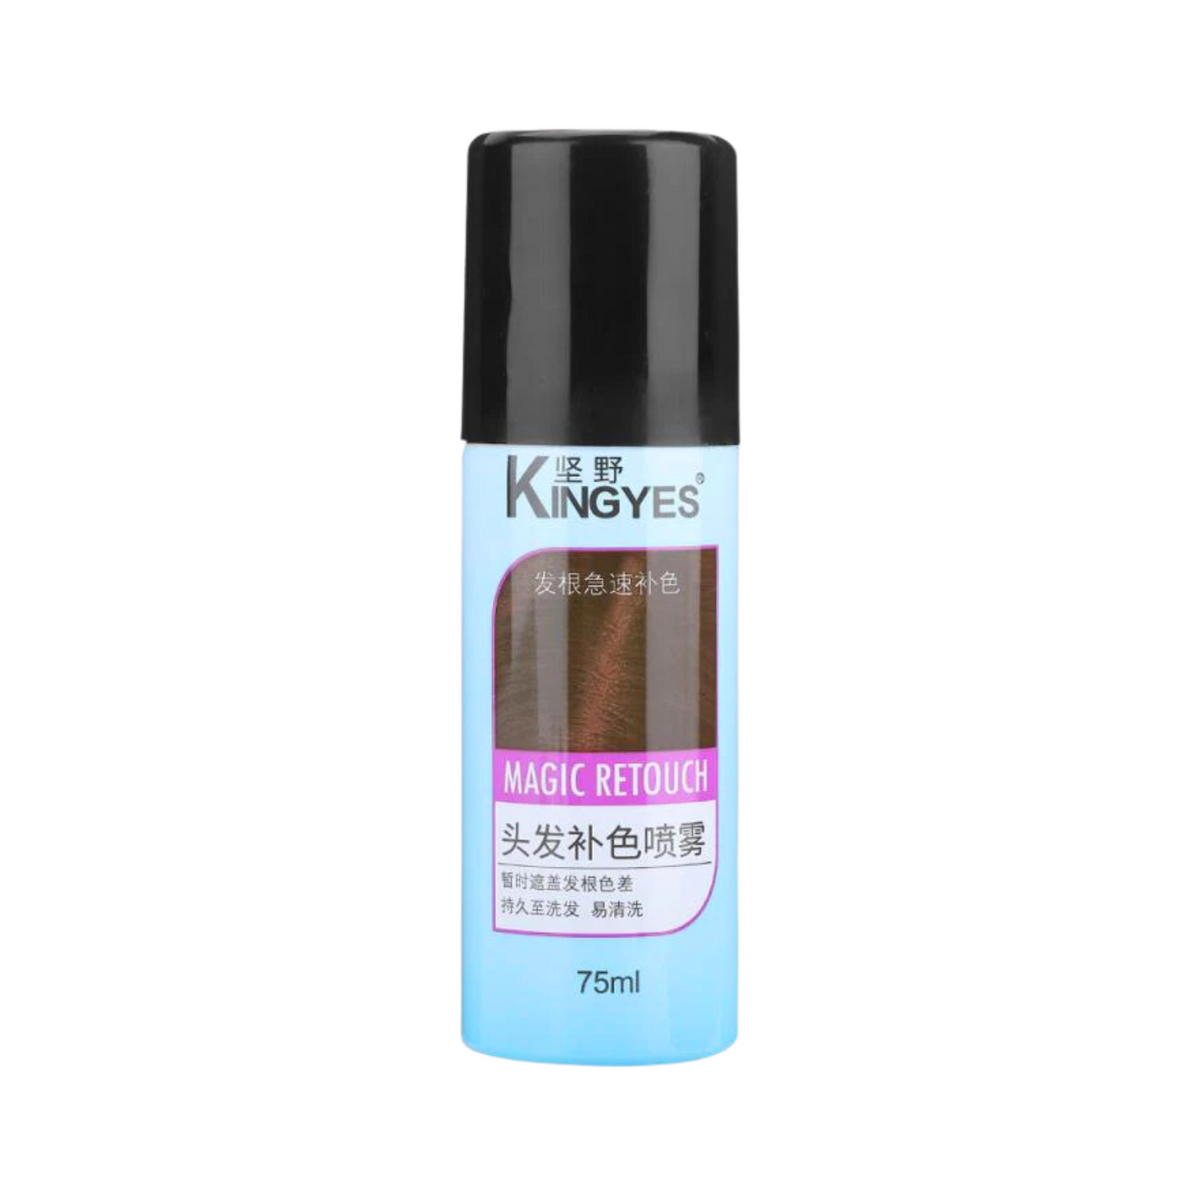 Kingyes Magic Retouch Instant Root Concealer Dark Brown Spray 75ml